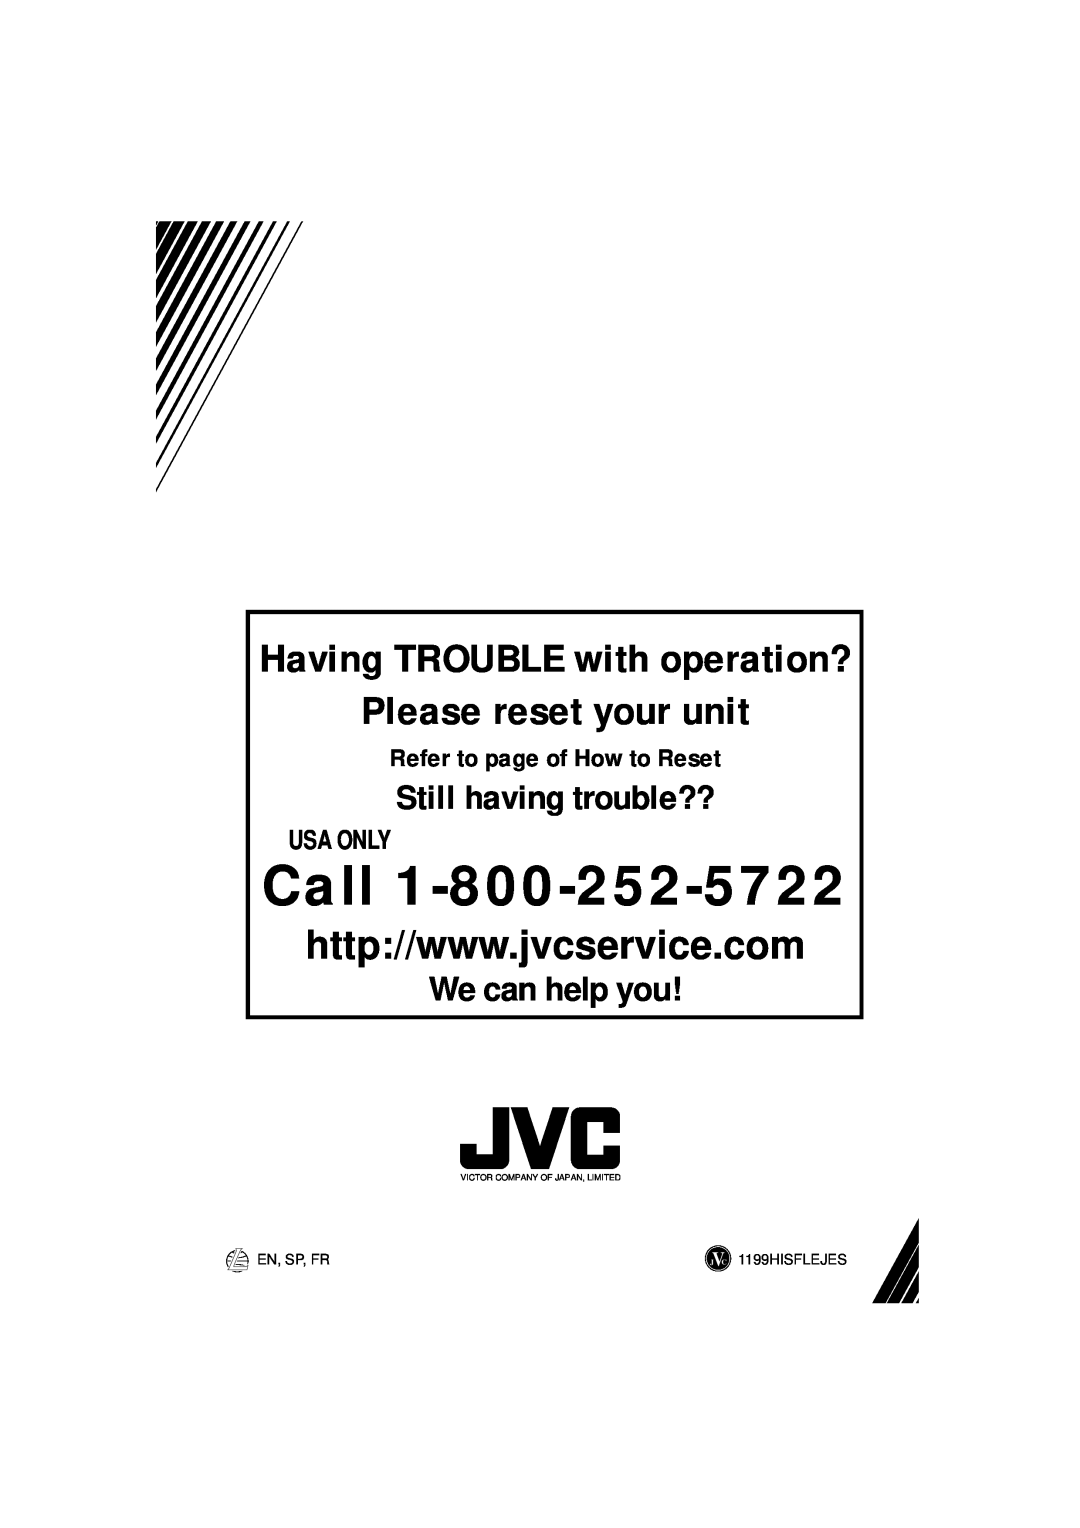 JVC KS-FX250 manual Call, Please reset your unit, Having TROUBLE with operation?, Still having trouble??, We can help you 